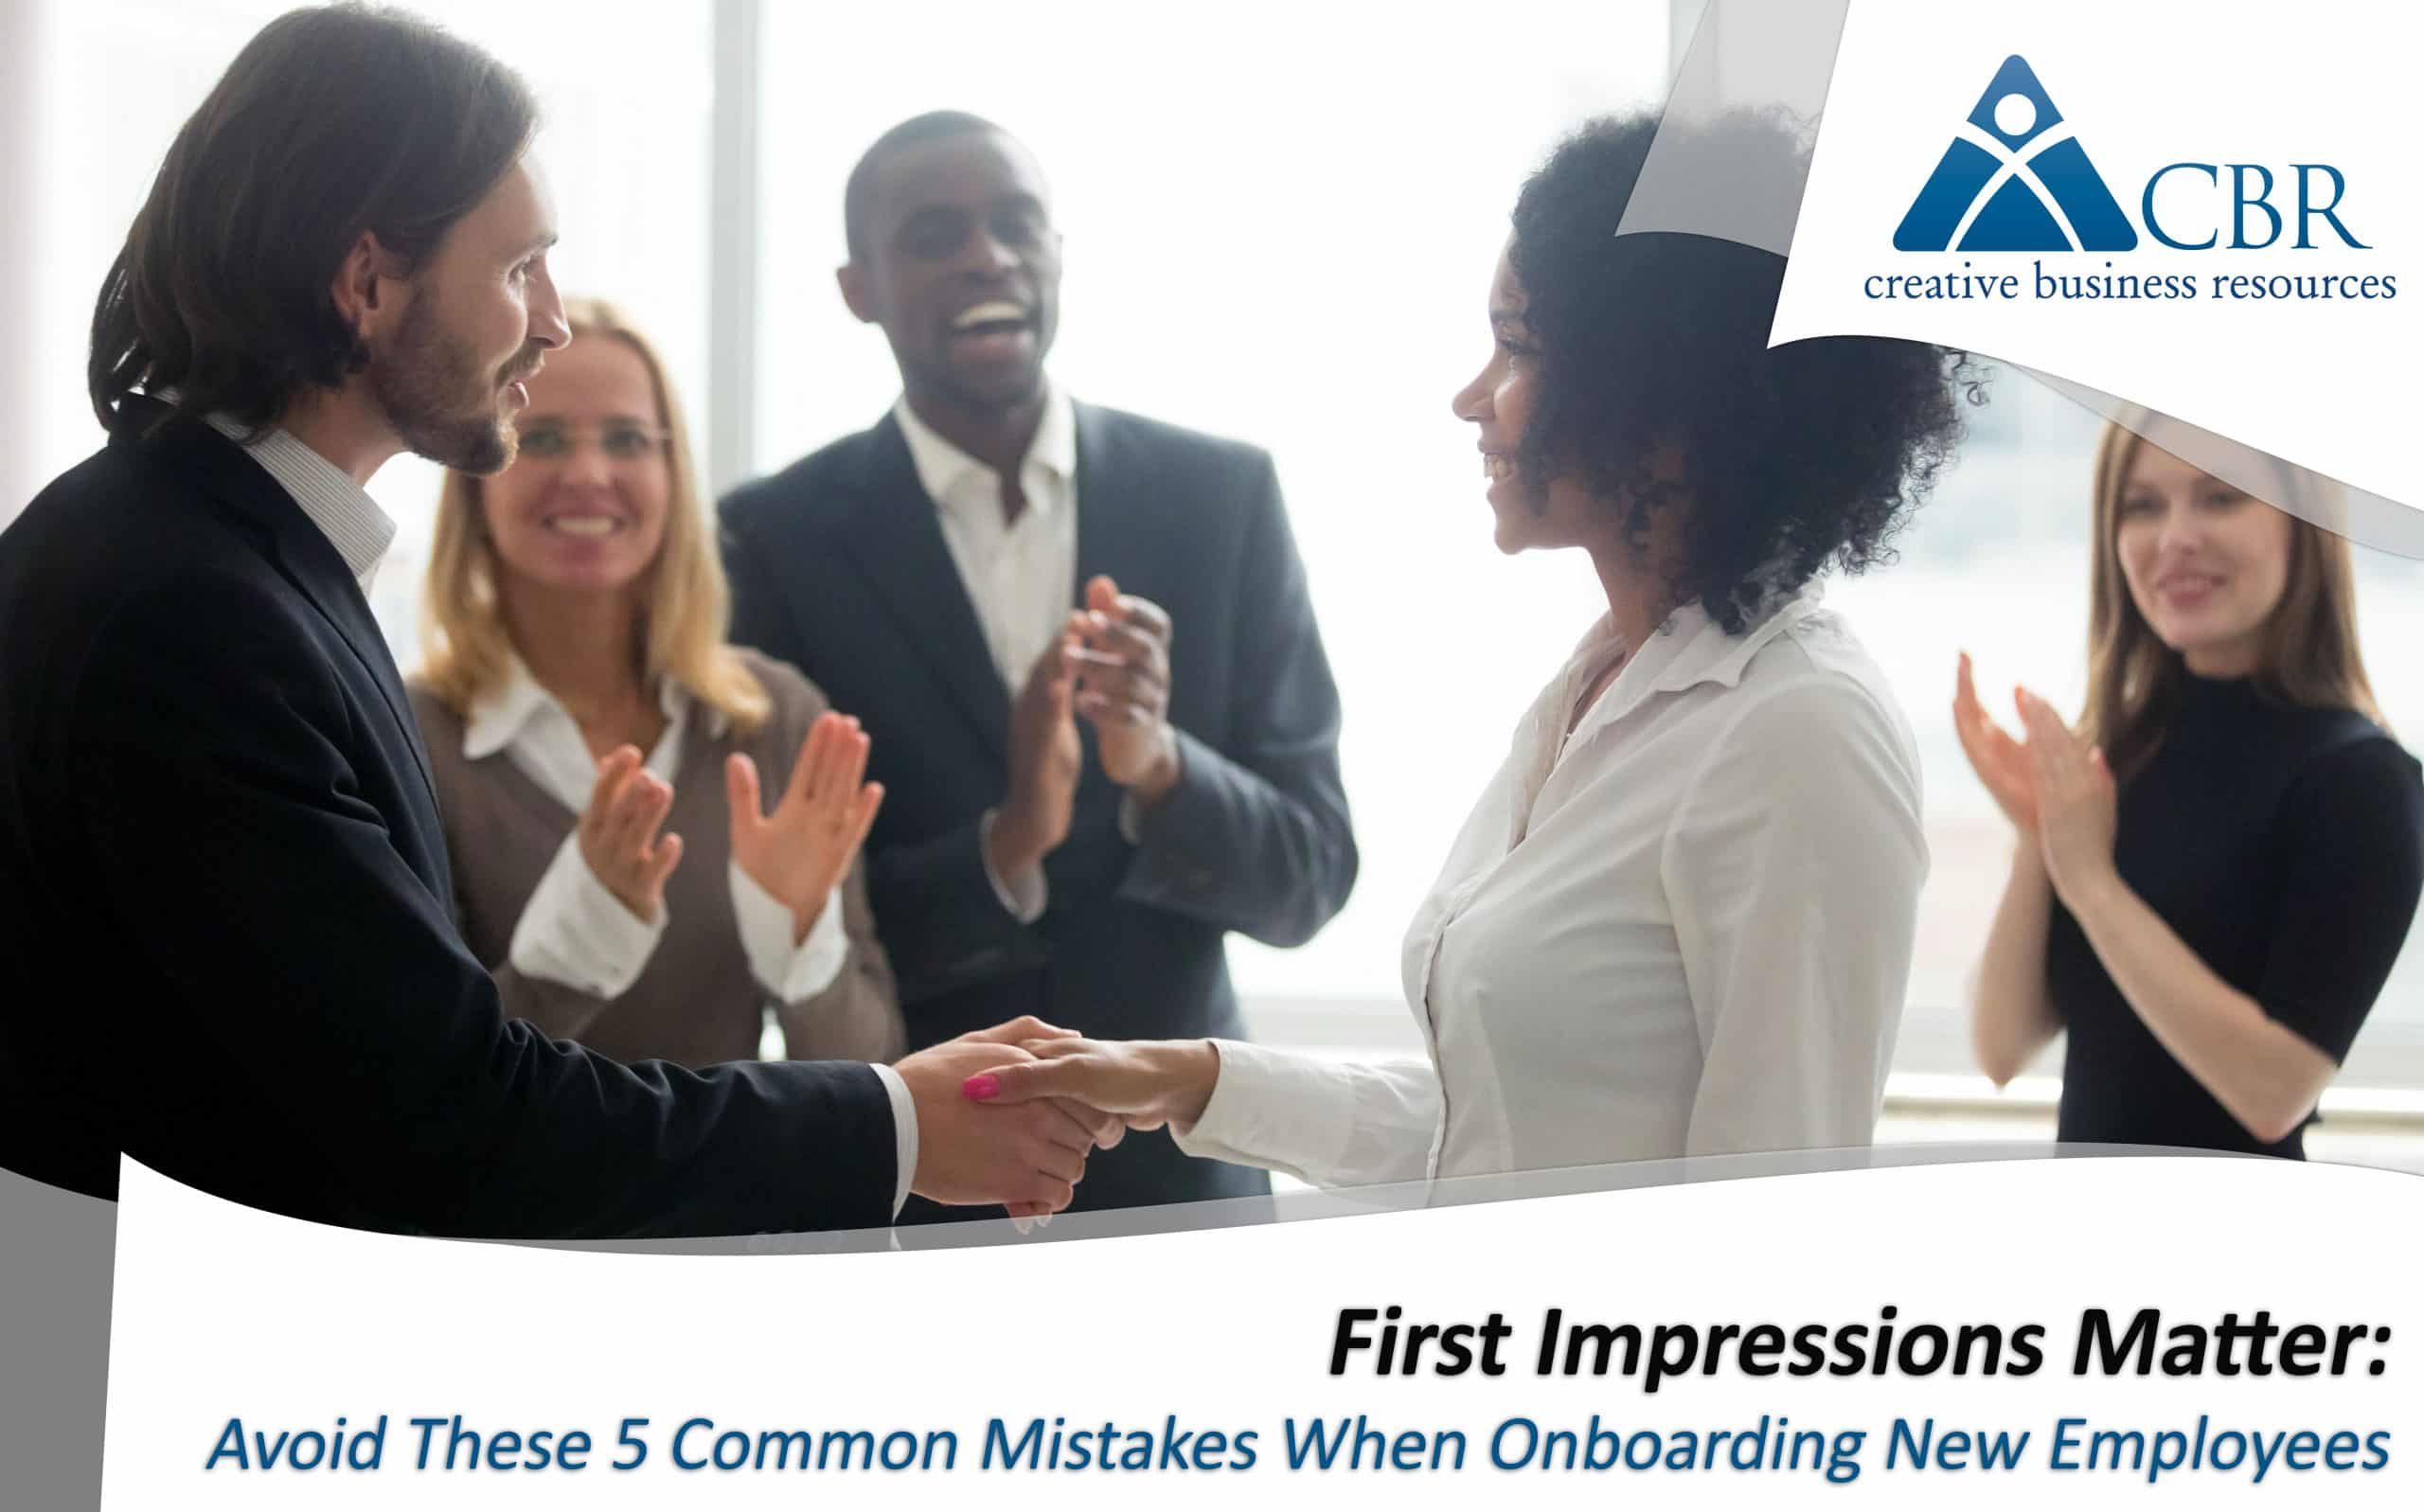 First Impressions Matter: Avoid These 5 Common Mistakes When Onboarding New Employees